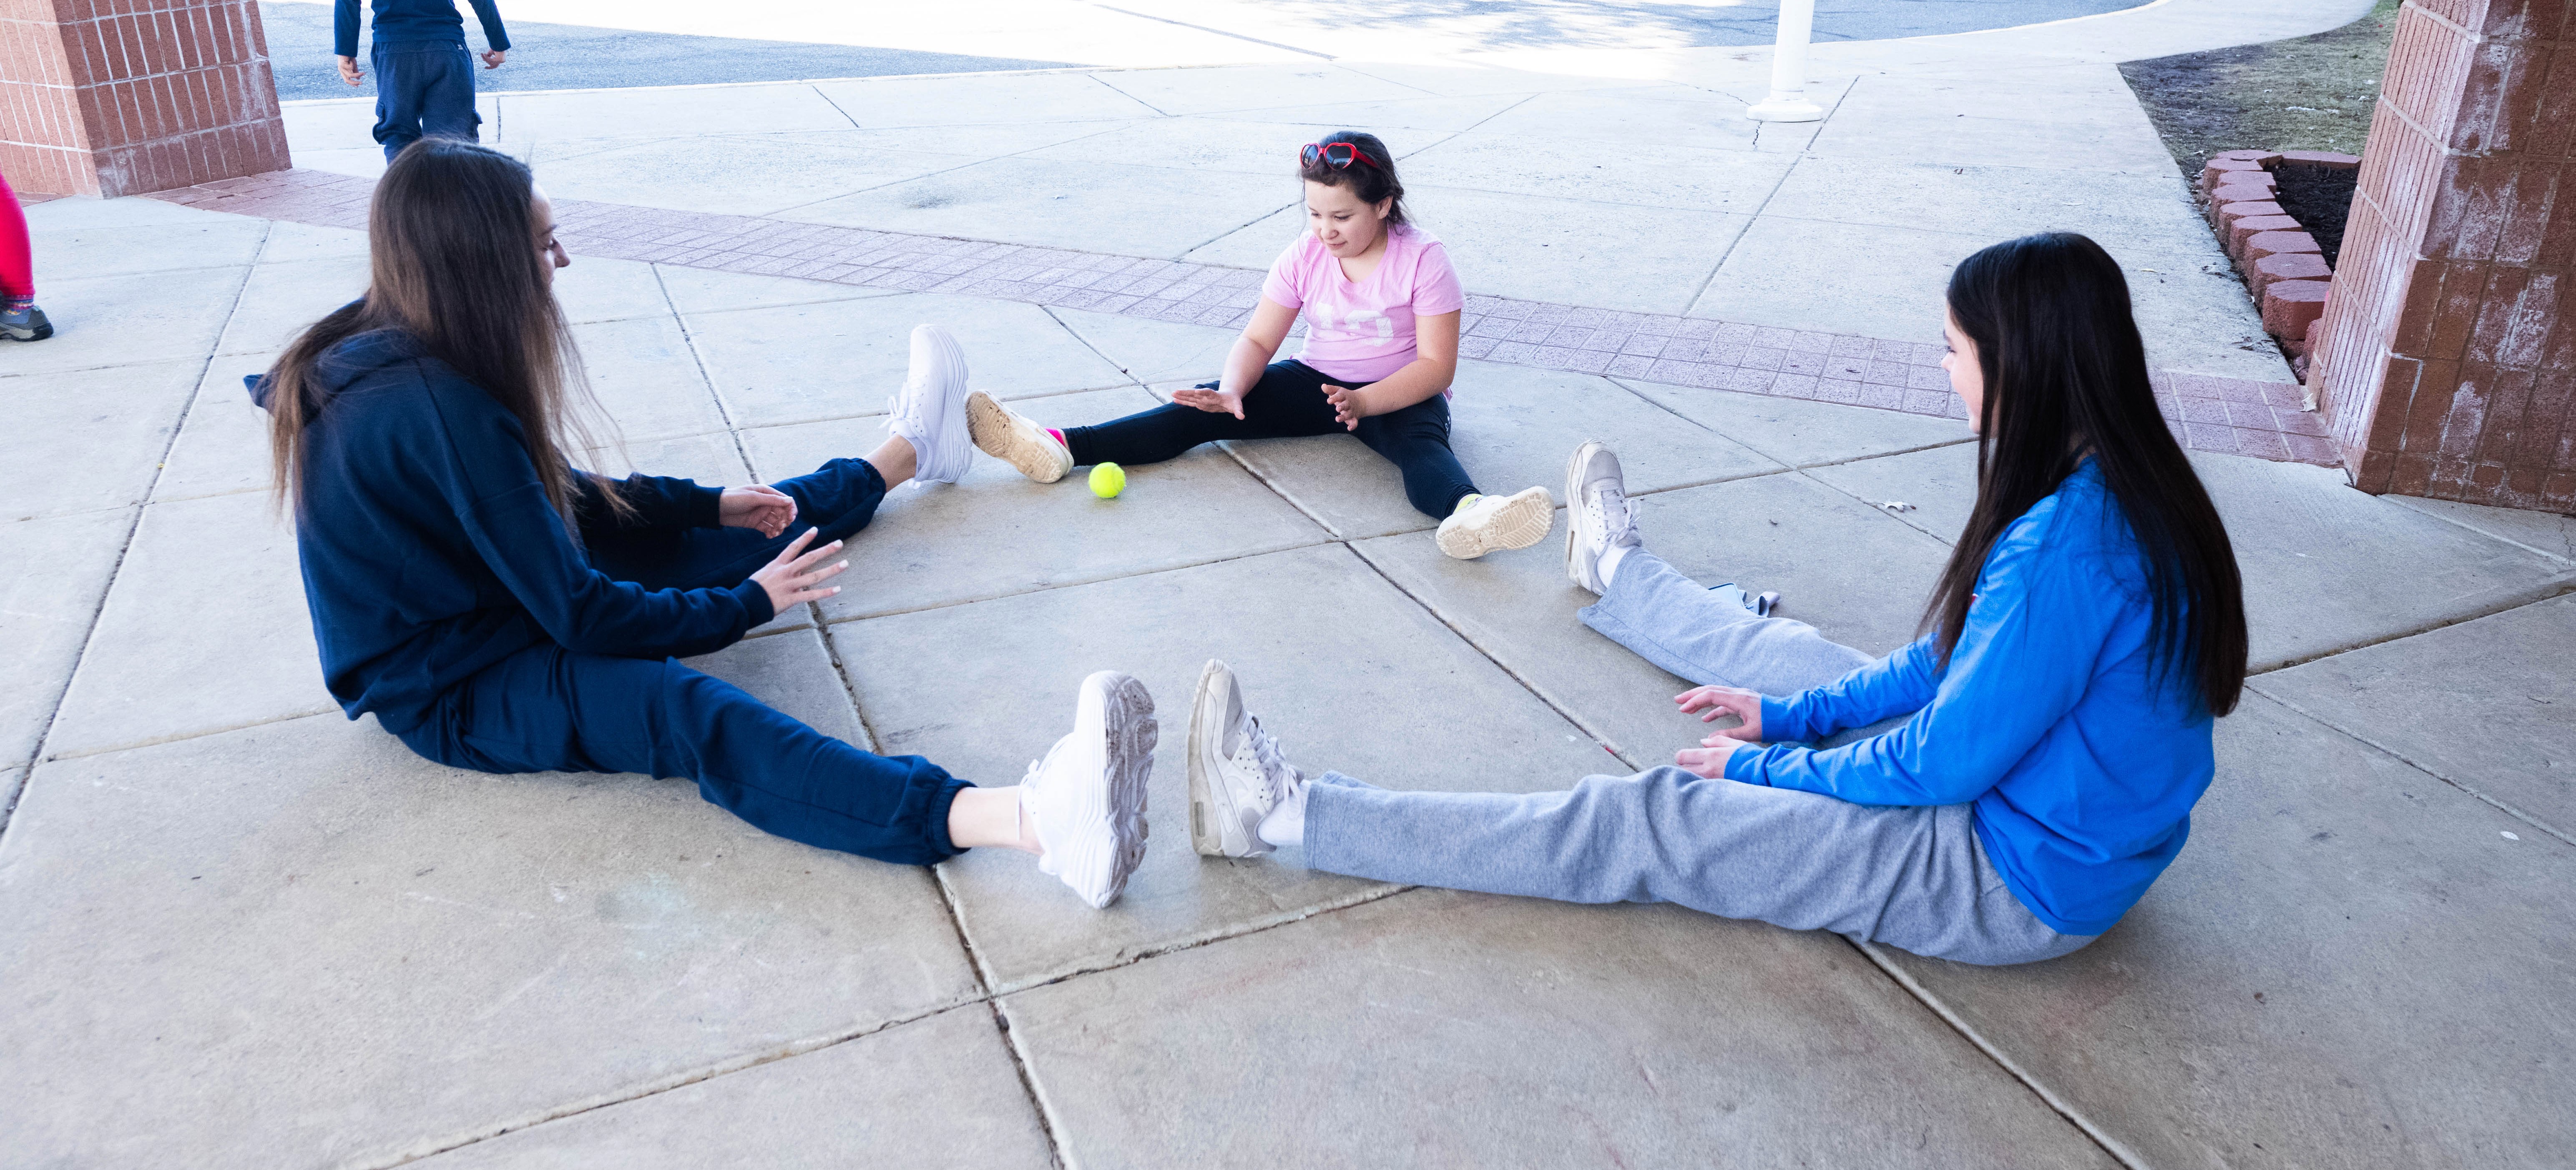 three students sitting on the ground and rolling a tennis ball back and forth